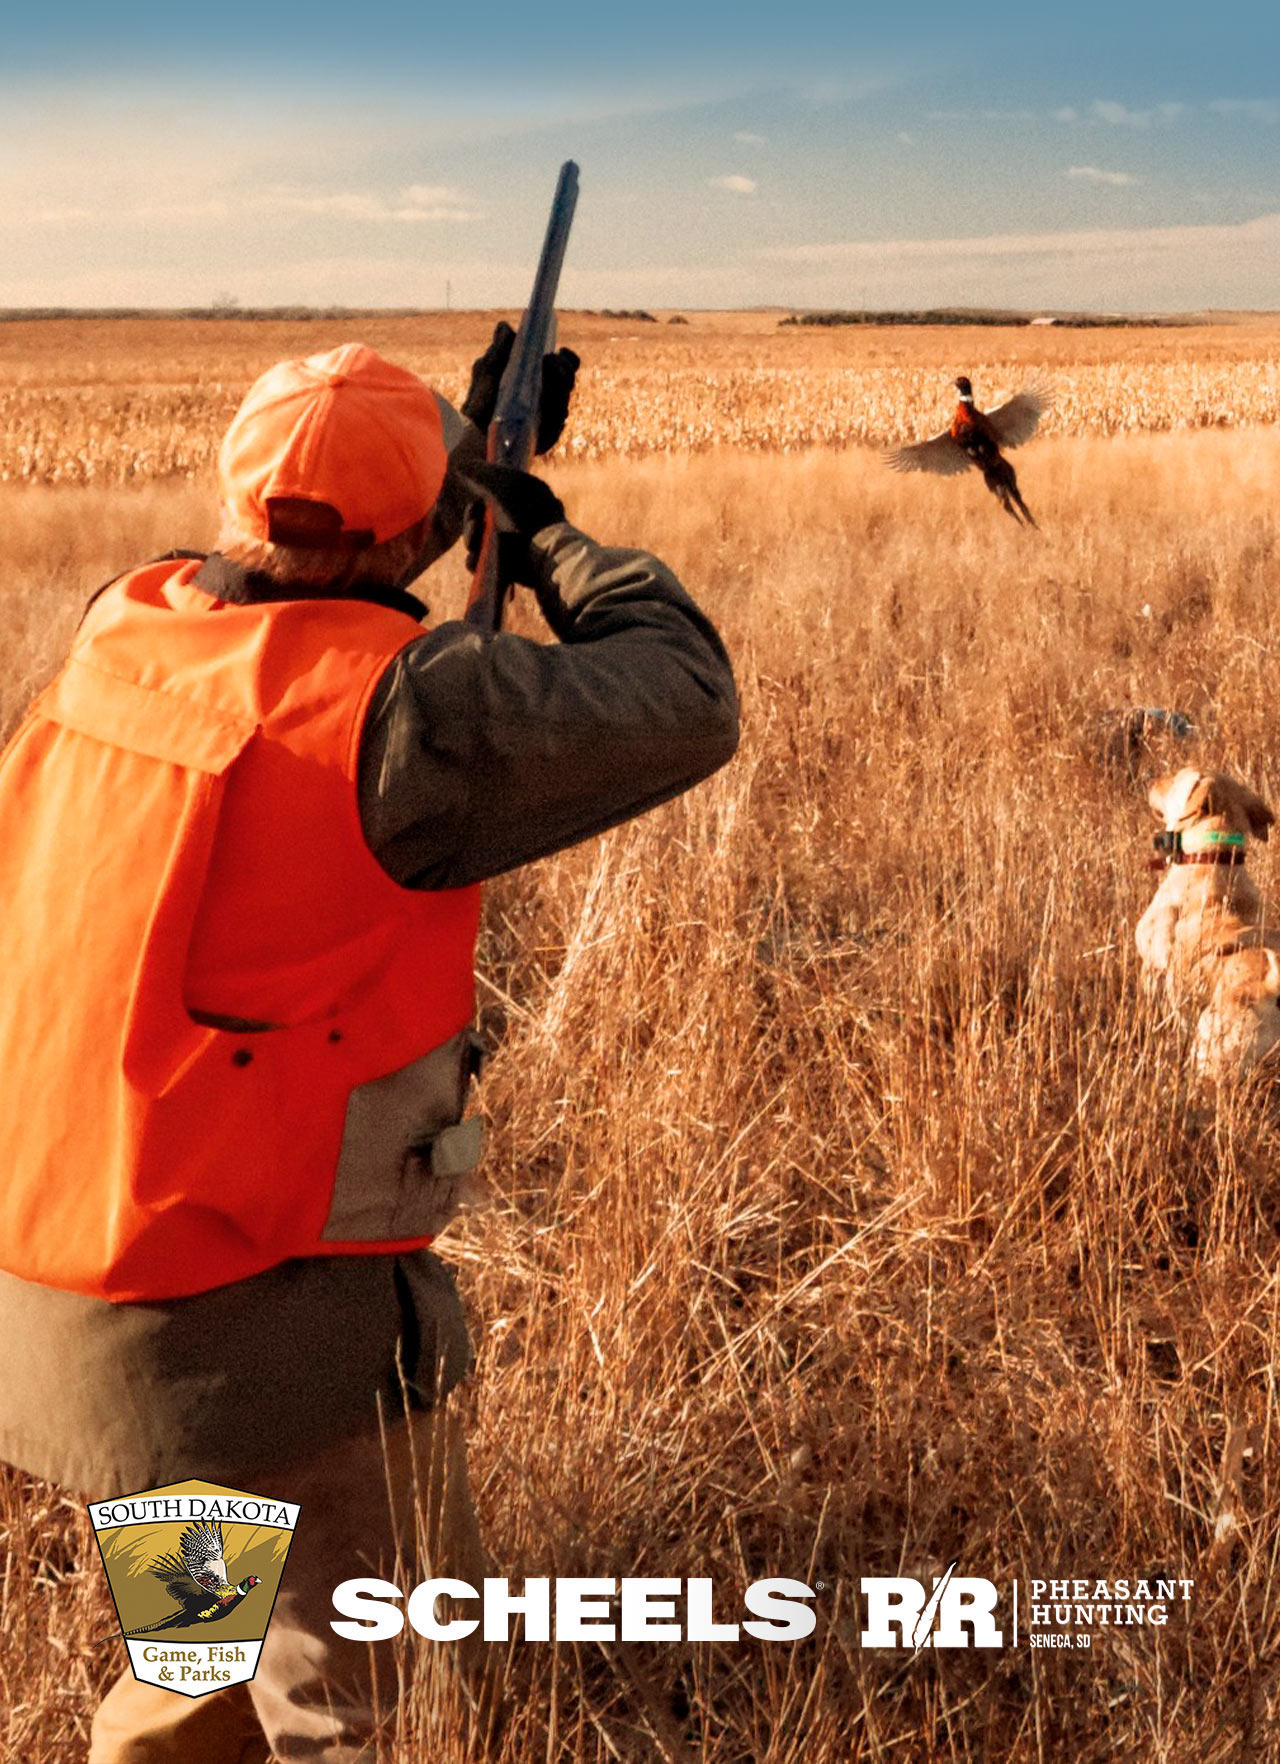 A man with his dog in a field aims his shotgun at a pheasant. Logos for South Dakota Game, Fish & Parks, Scheels and RR Pheasant Hunting line the bottom of the image.